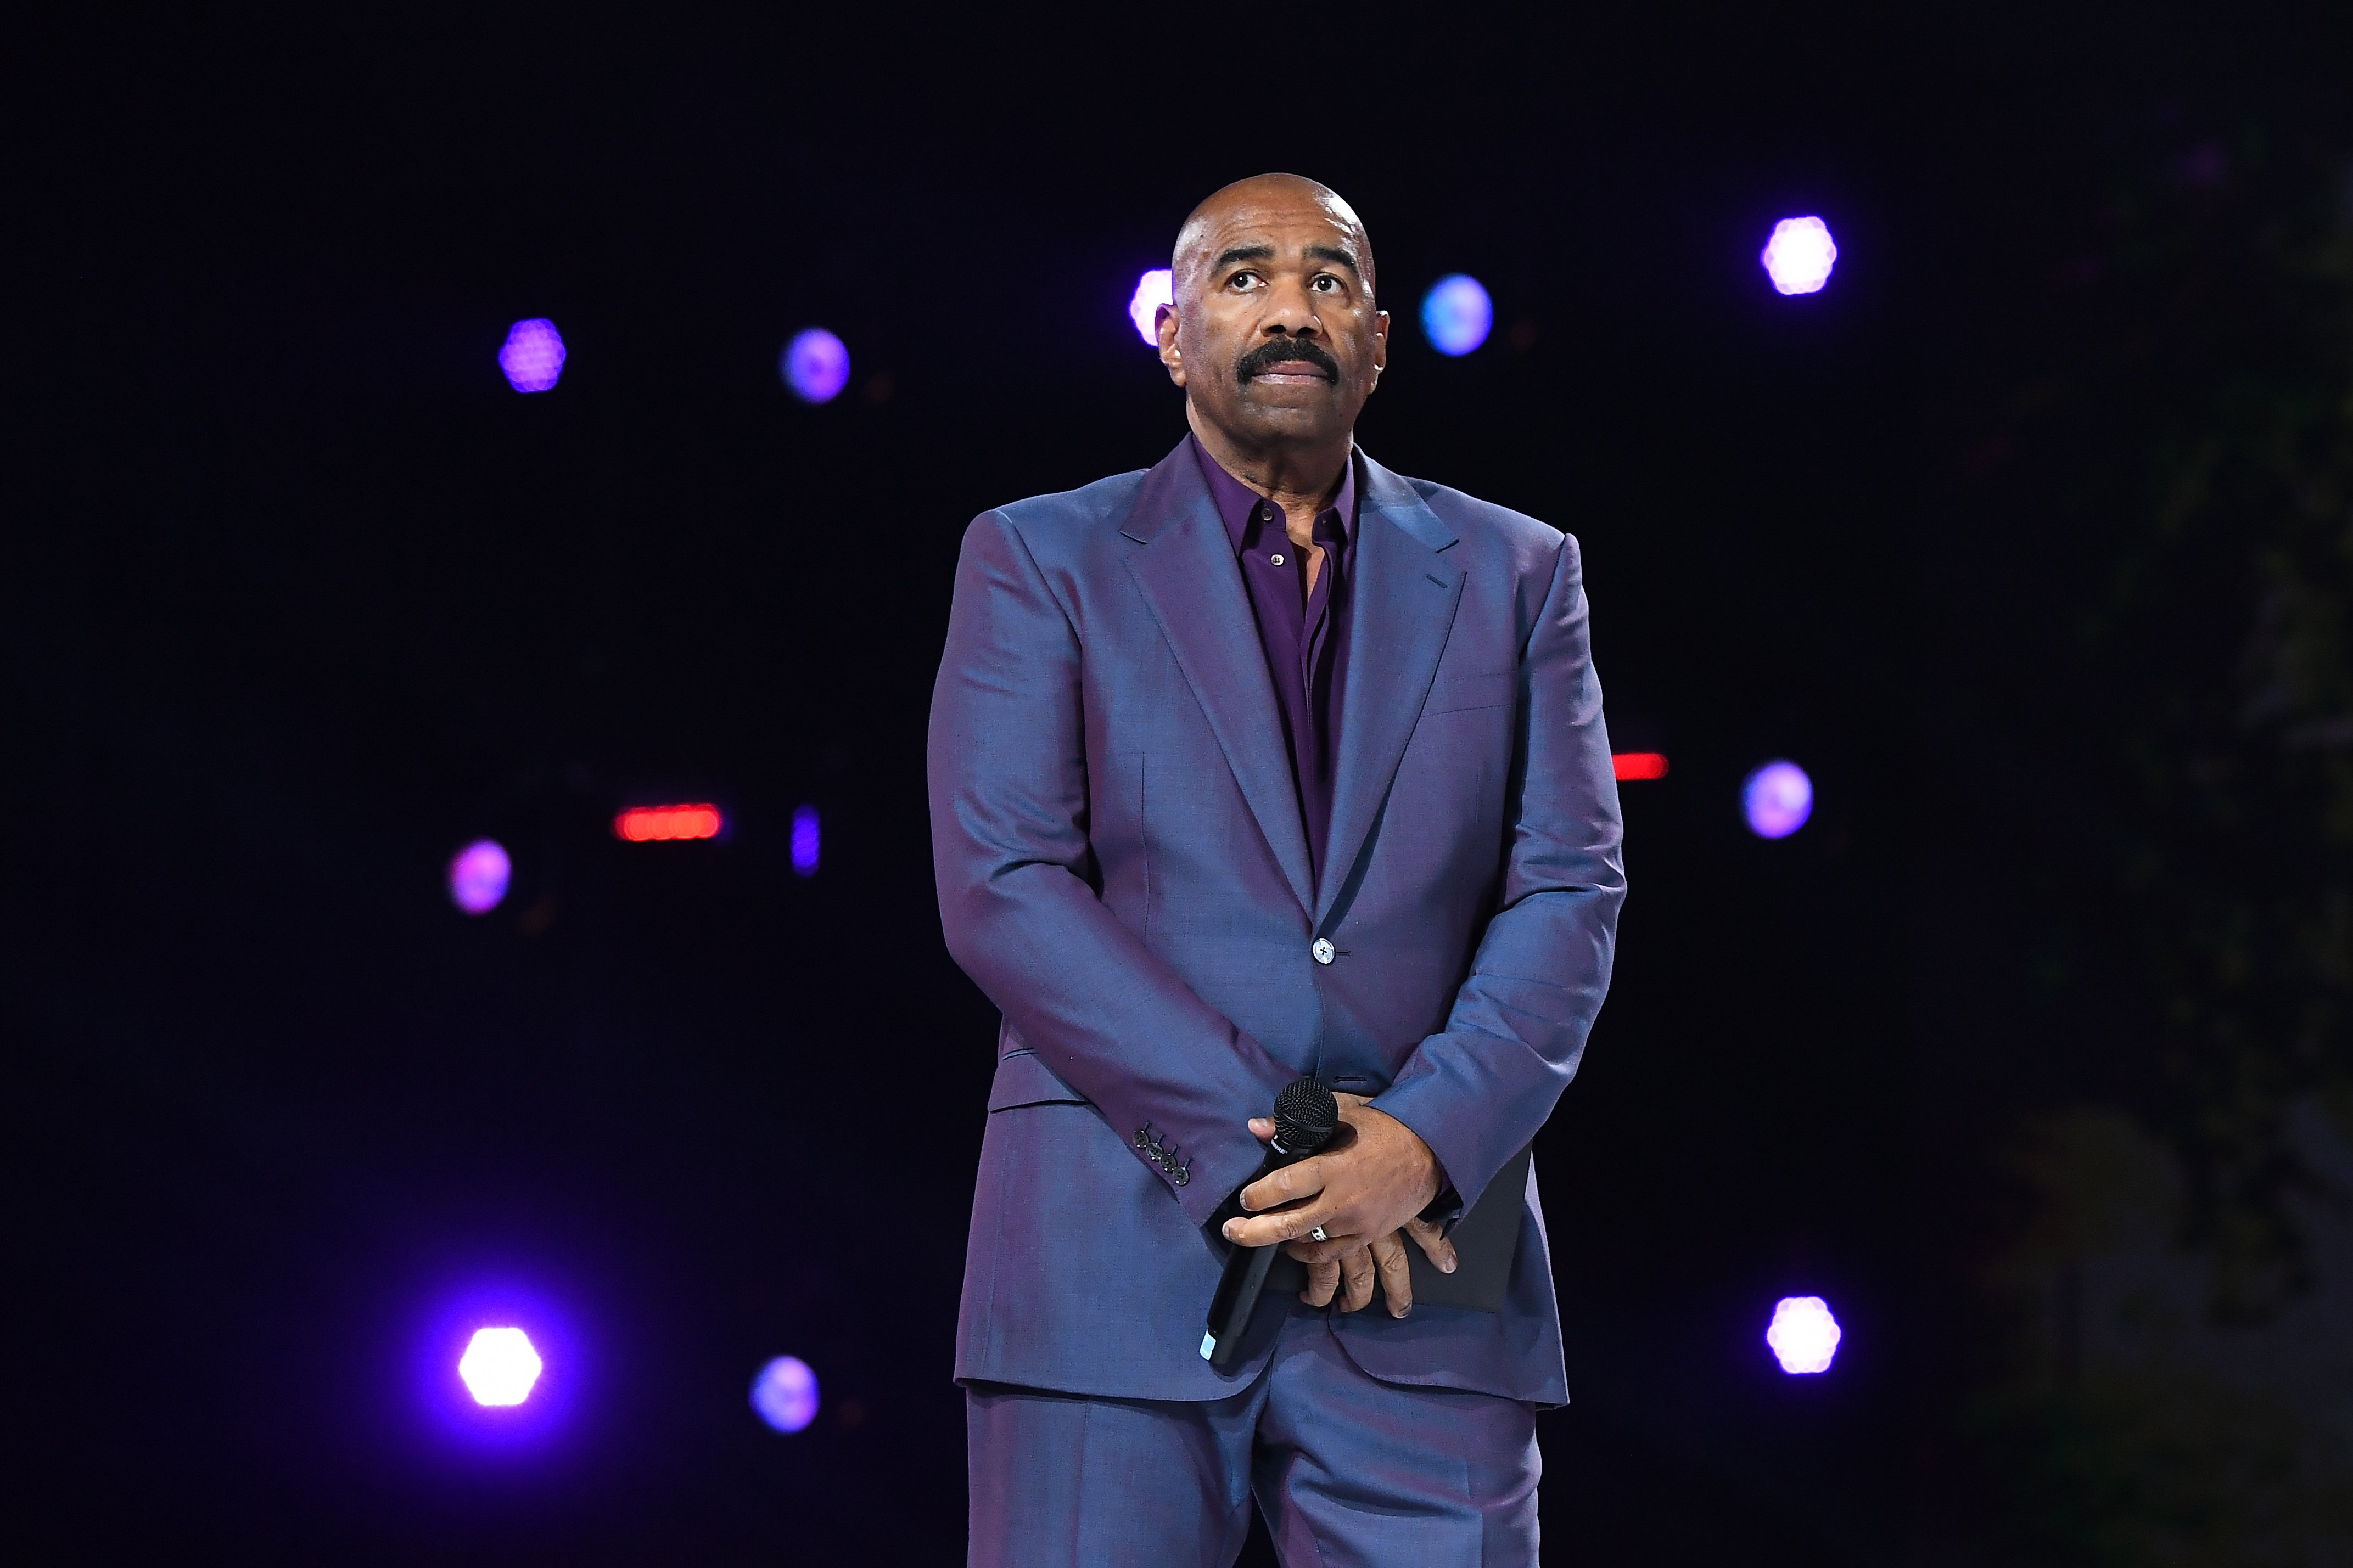 Steve Harvey onstage during the Beloved Benefit on March 21, 2019, in Atlanta, Georgia. | Source: Getty Images.